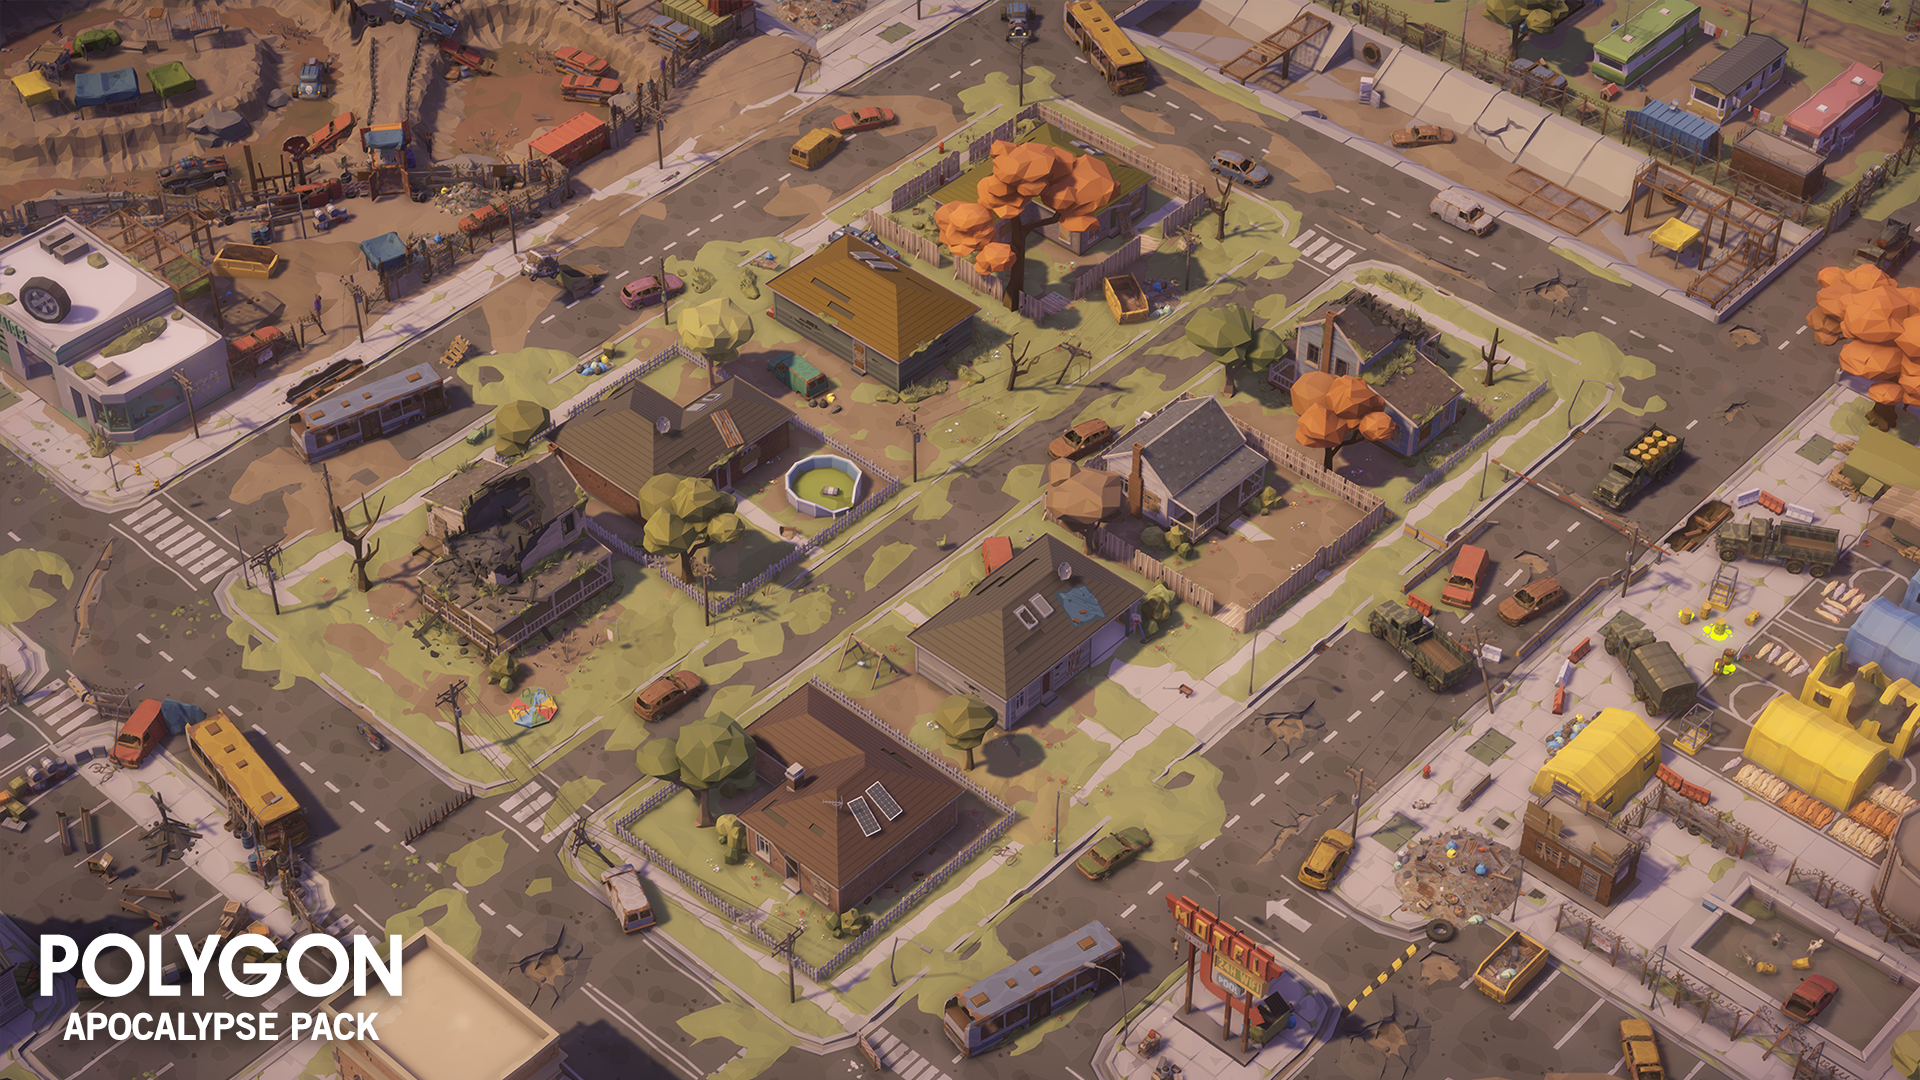 Aerial view of a deserted neighbourhood for developing apocalypse themed games